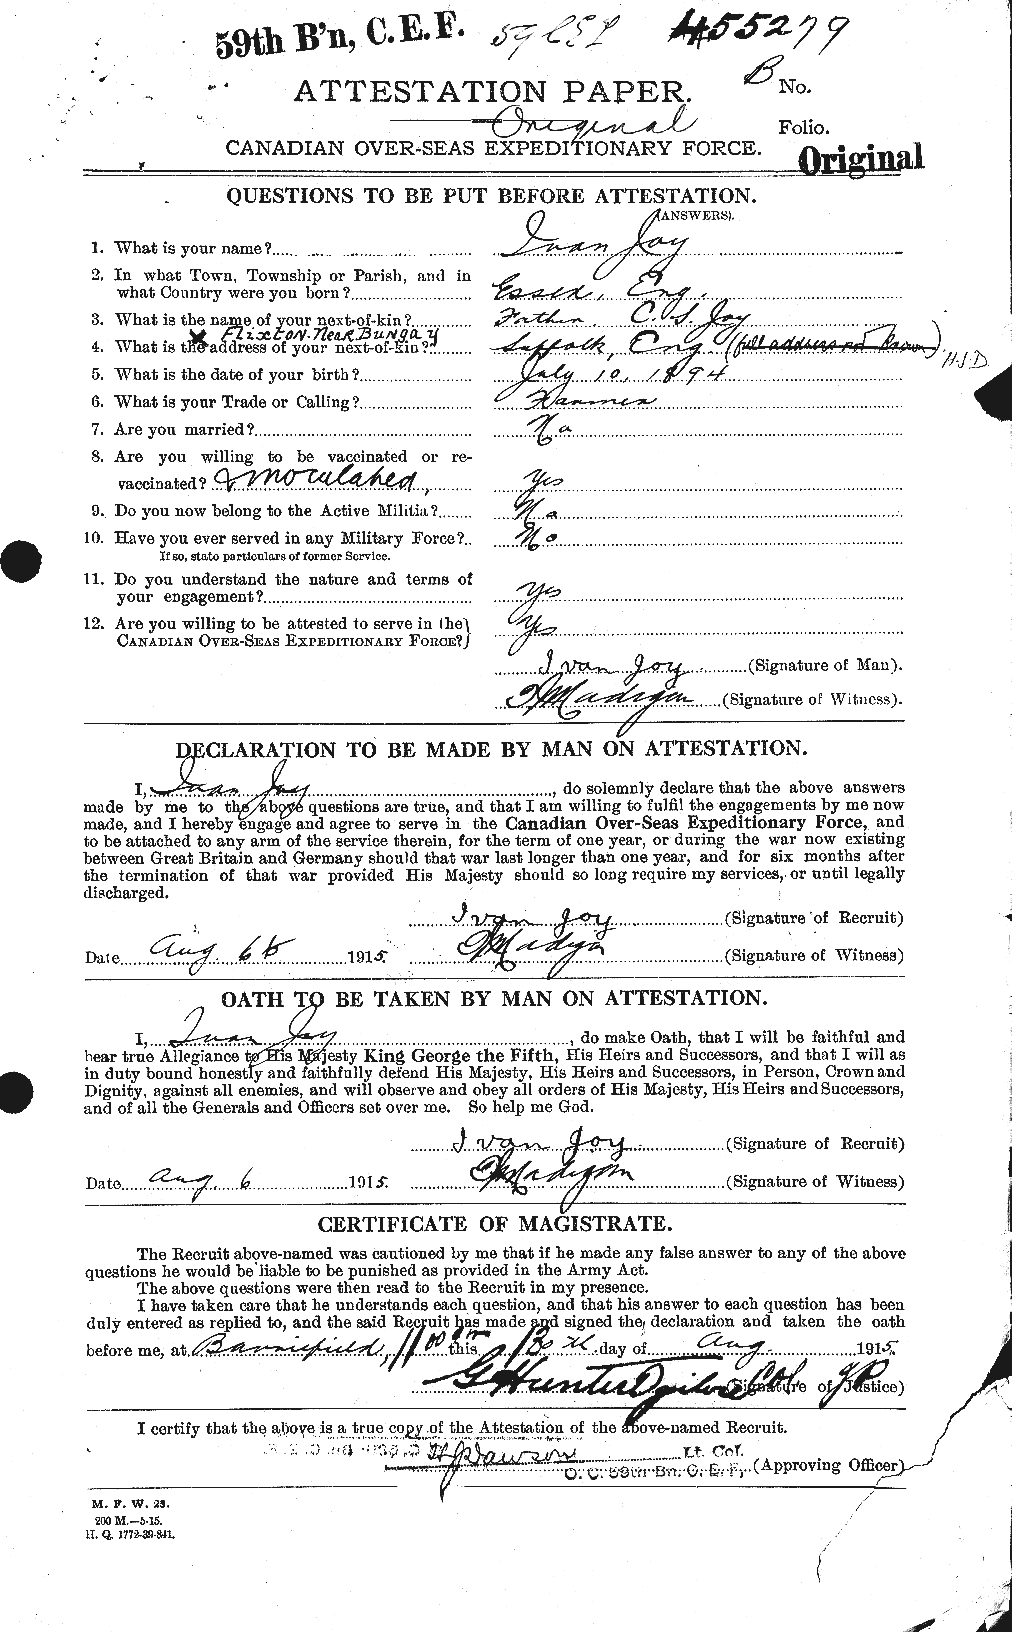 Personnel Records of the First World War - CEF 426375a